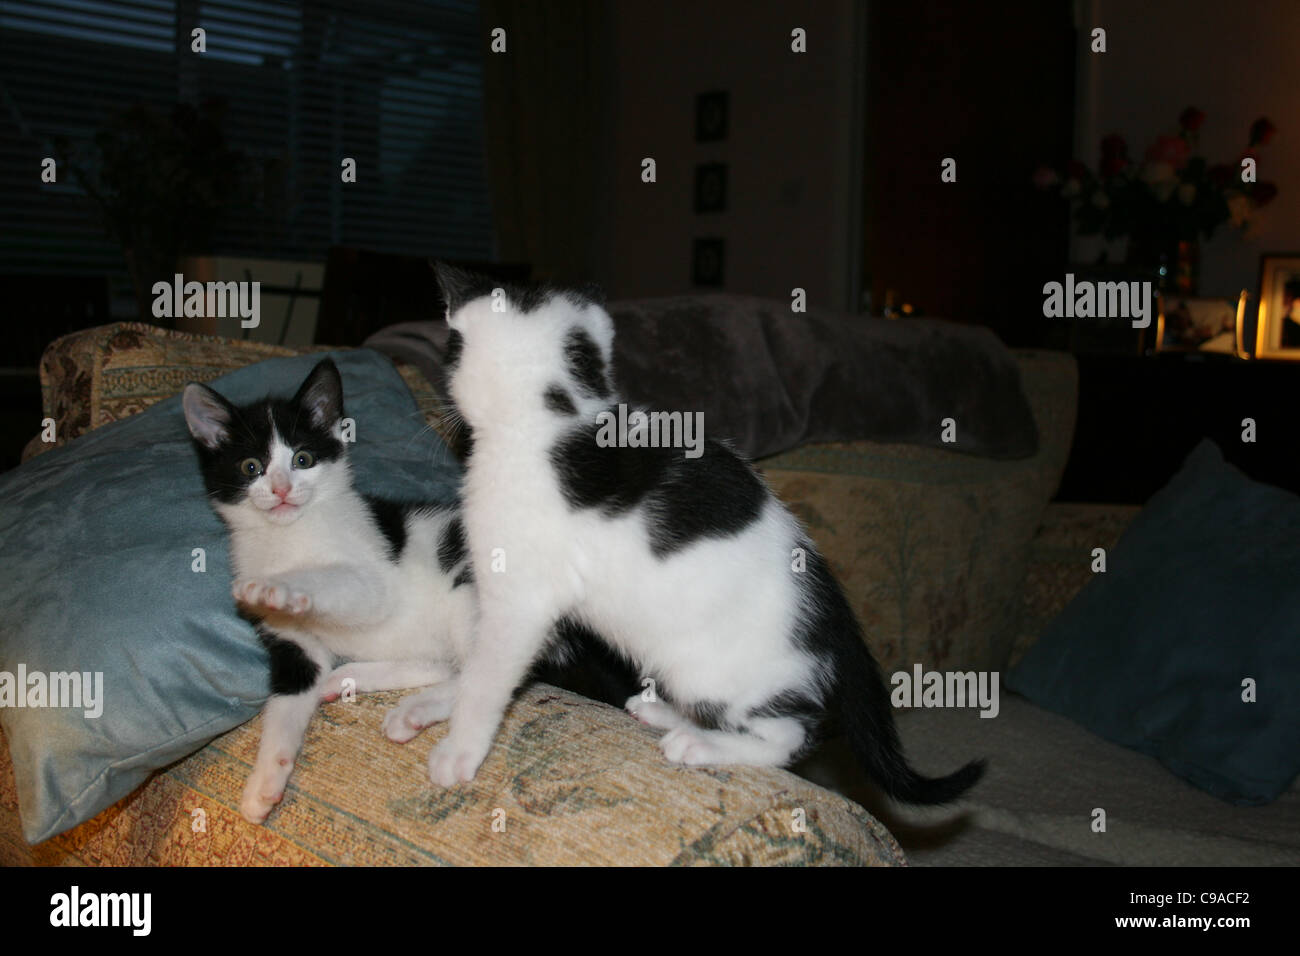 Black and white kittens playing on sofa one kitten has a surprised look and a paw out in front. Stock Photo